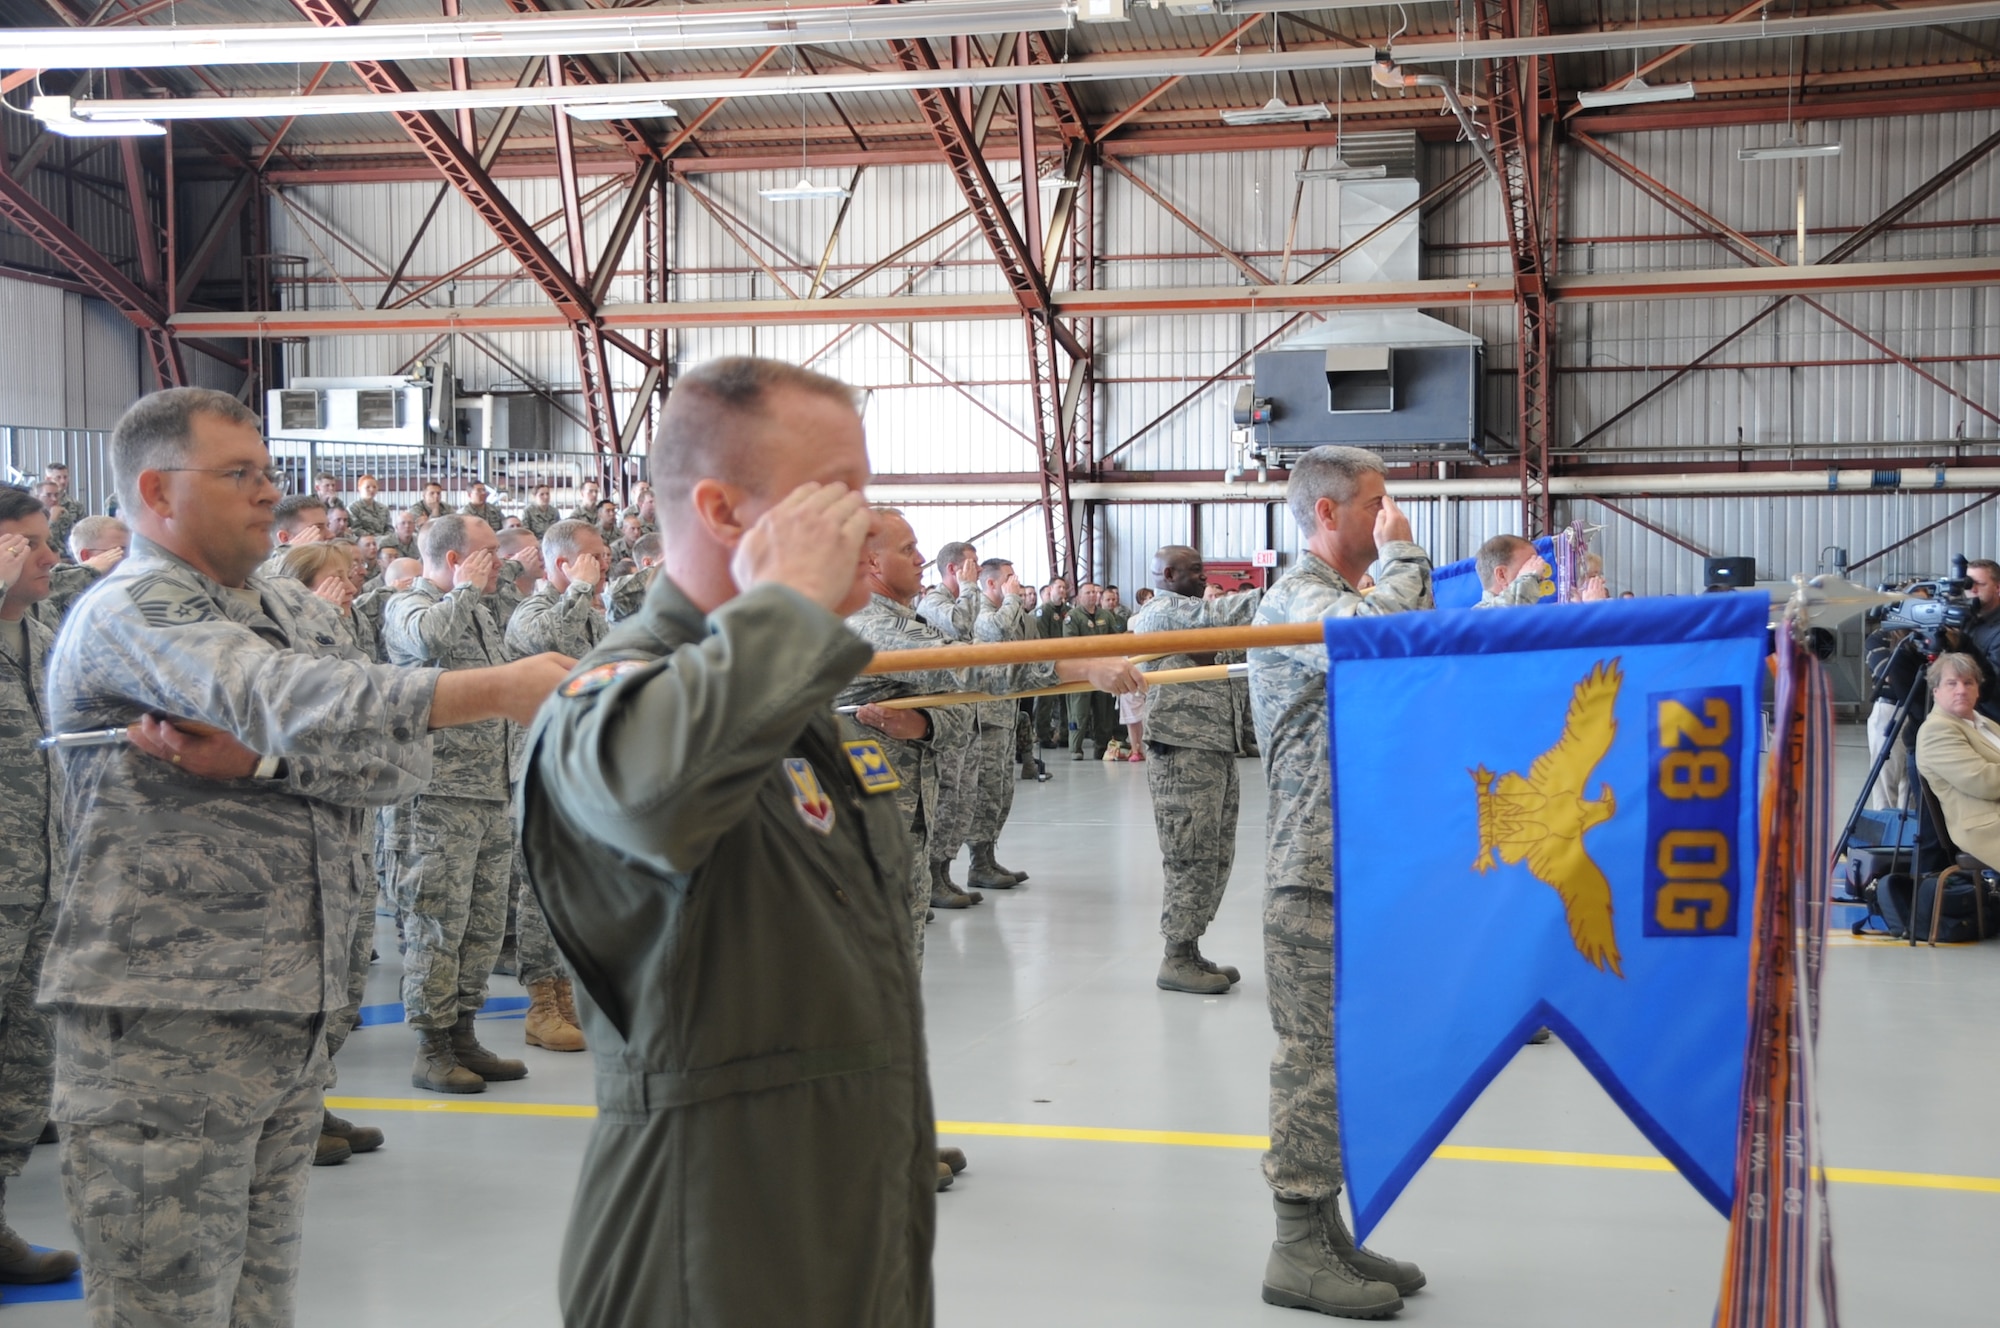 Commanders Col. Buck Shawhan, 28th Operations Group; Col. Thomas Fitch, 28th Maintenance Group; Col. Michael Yuill, 28th Mission Support Group; and Col. Naomi Boss, 28th Medical Group, lead formations in saluting the new 28th Bomb Wing commander, Col. Jeffrey Taliaferro, here, June 04.  Lt. Gen. Norman Seip, 12th Air Force commander, officiated the change of command ceremony. (U.S. Air Force photo/Senior Airman Anthony Sanchelli)

